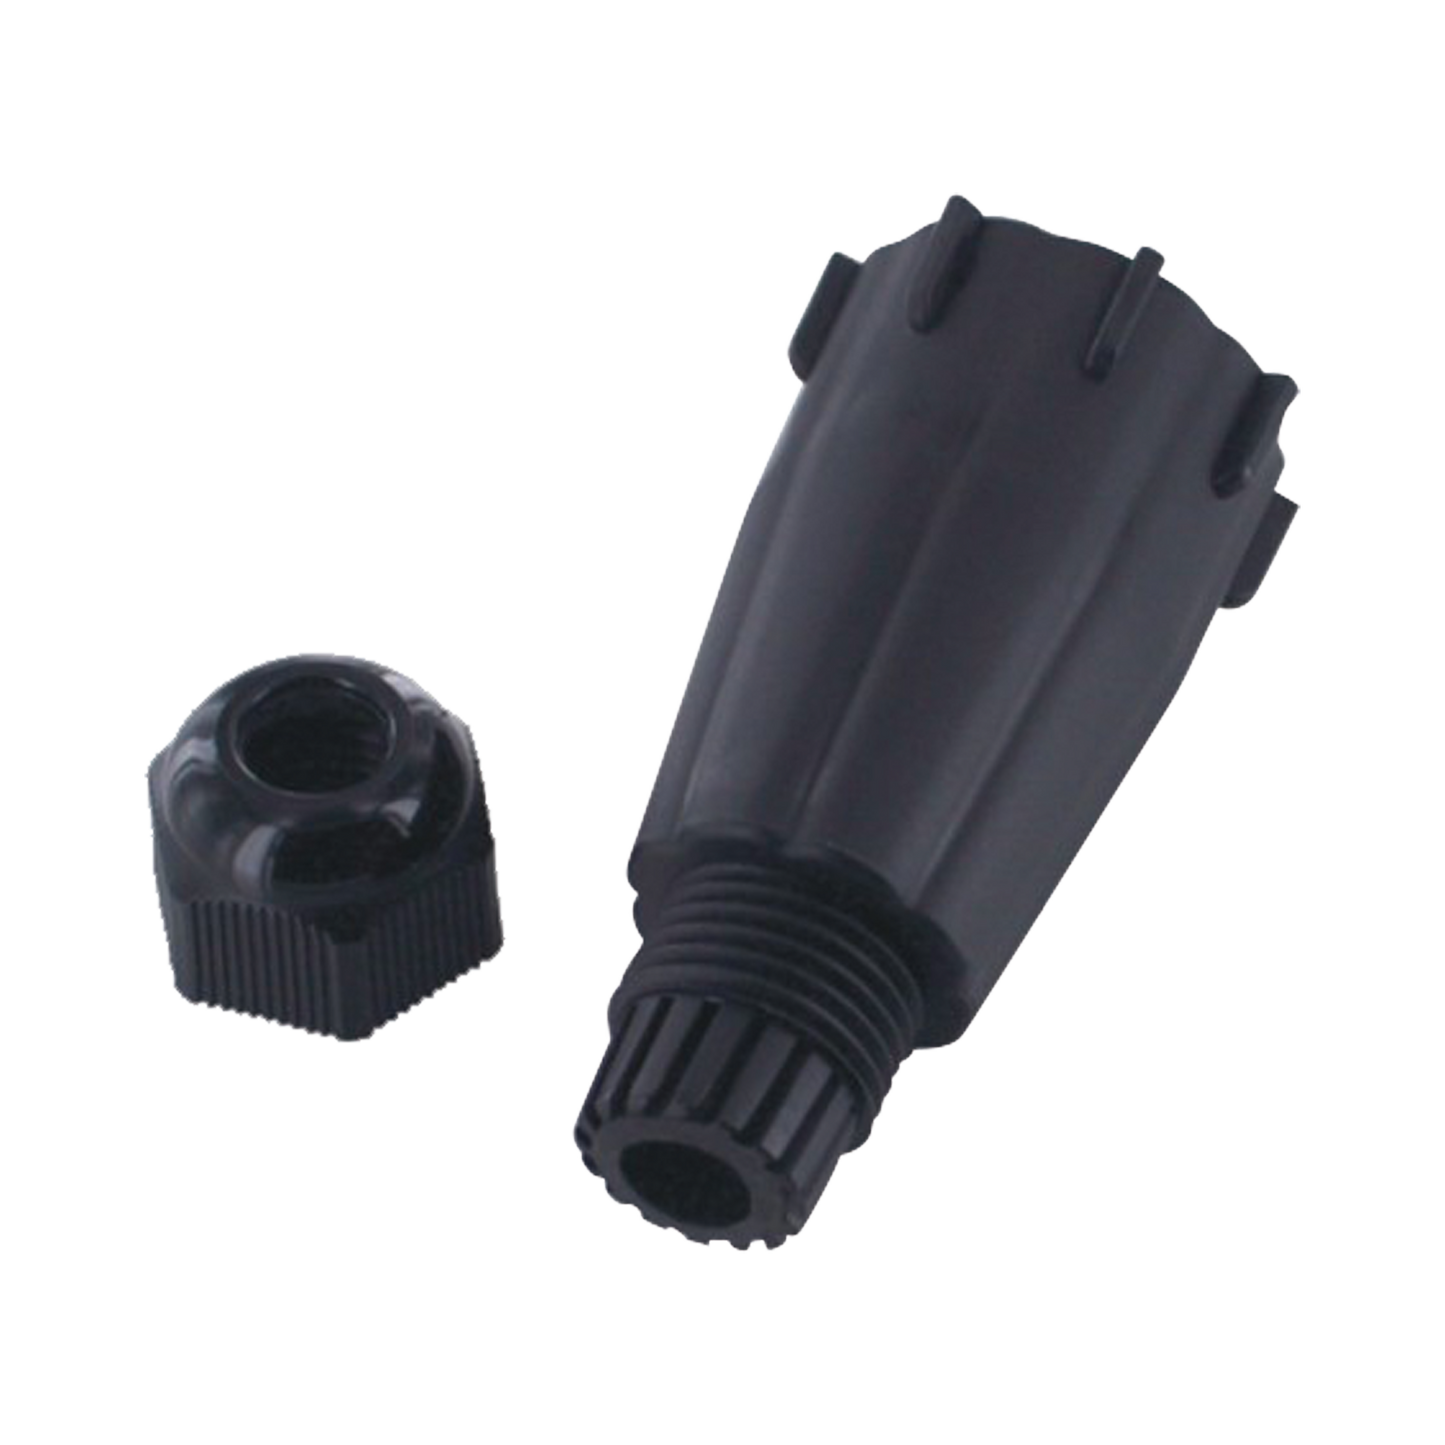 Gland Connector to protect network connections in Industrial applications